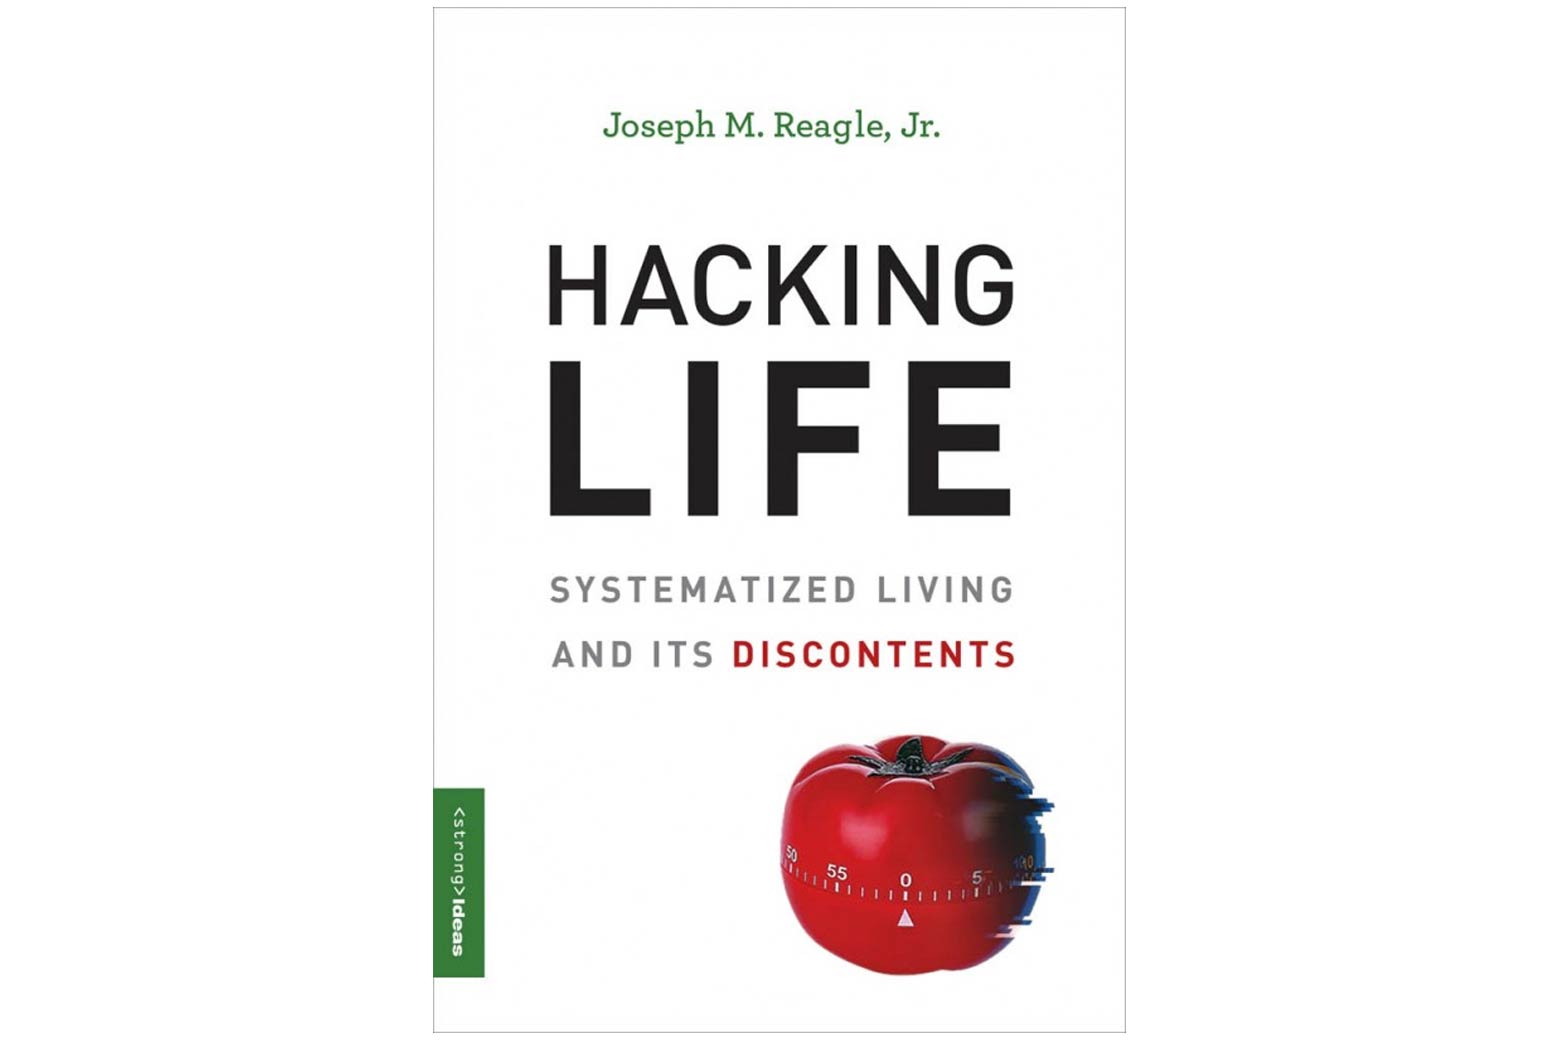 Hacking Life book cover.